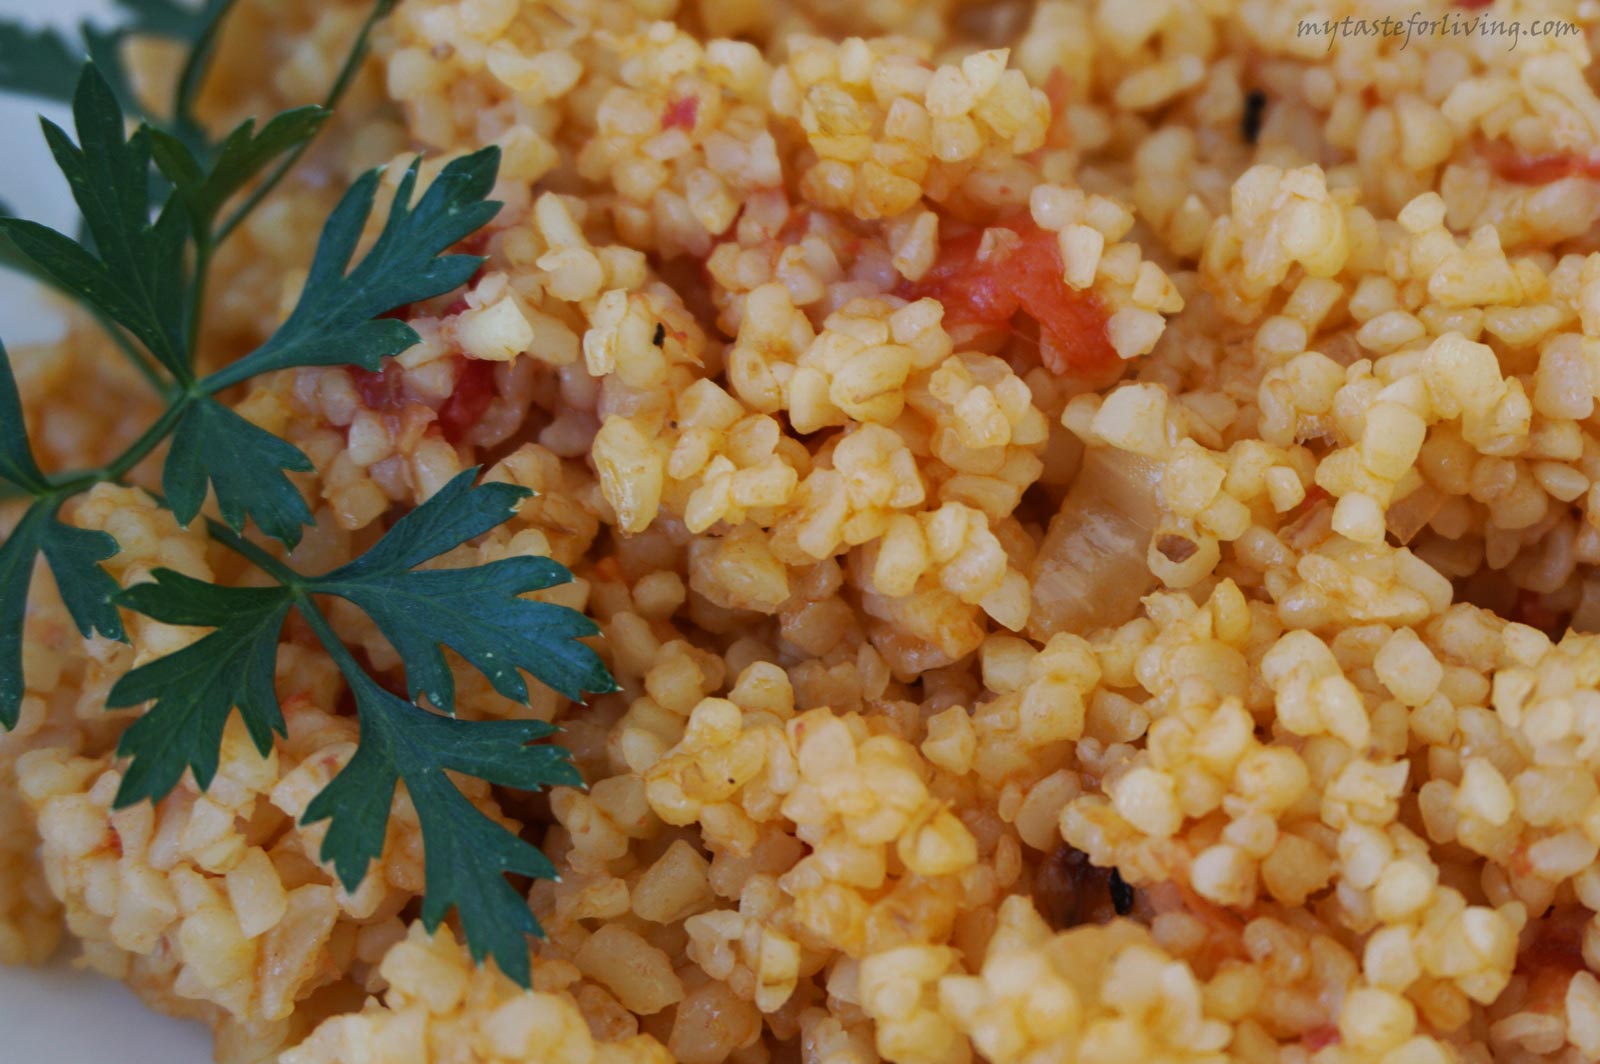 Bulgur with tomatoes and onions - a favorite dish that I often prepare in the summer with fresh tomatoes from the garden.